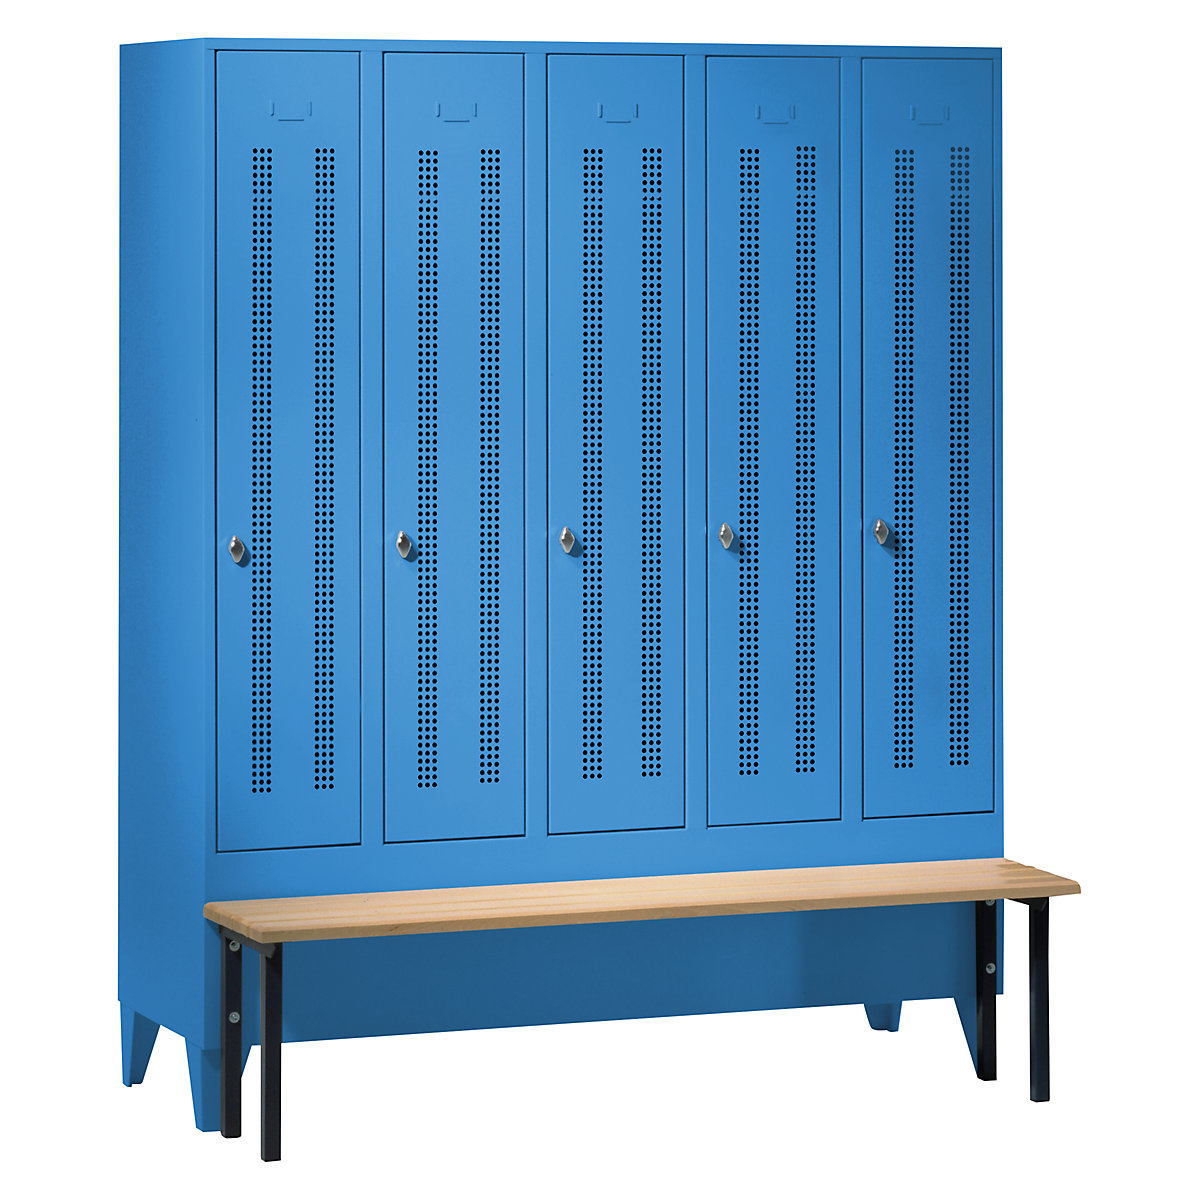 Clothes locker with bench mounted in front – Wolf